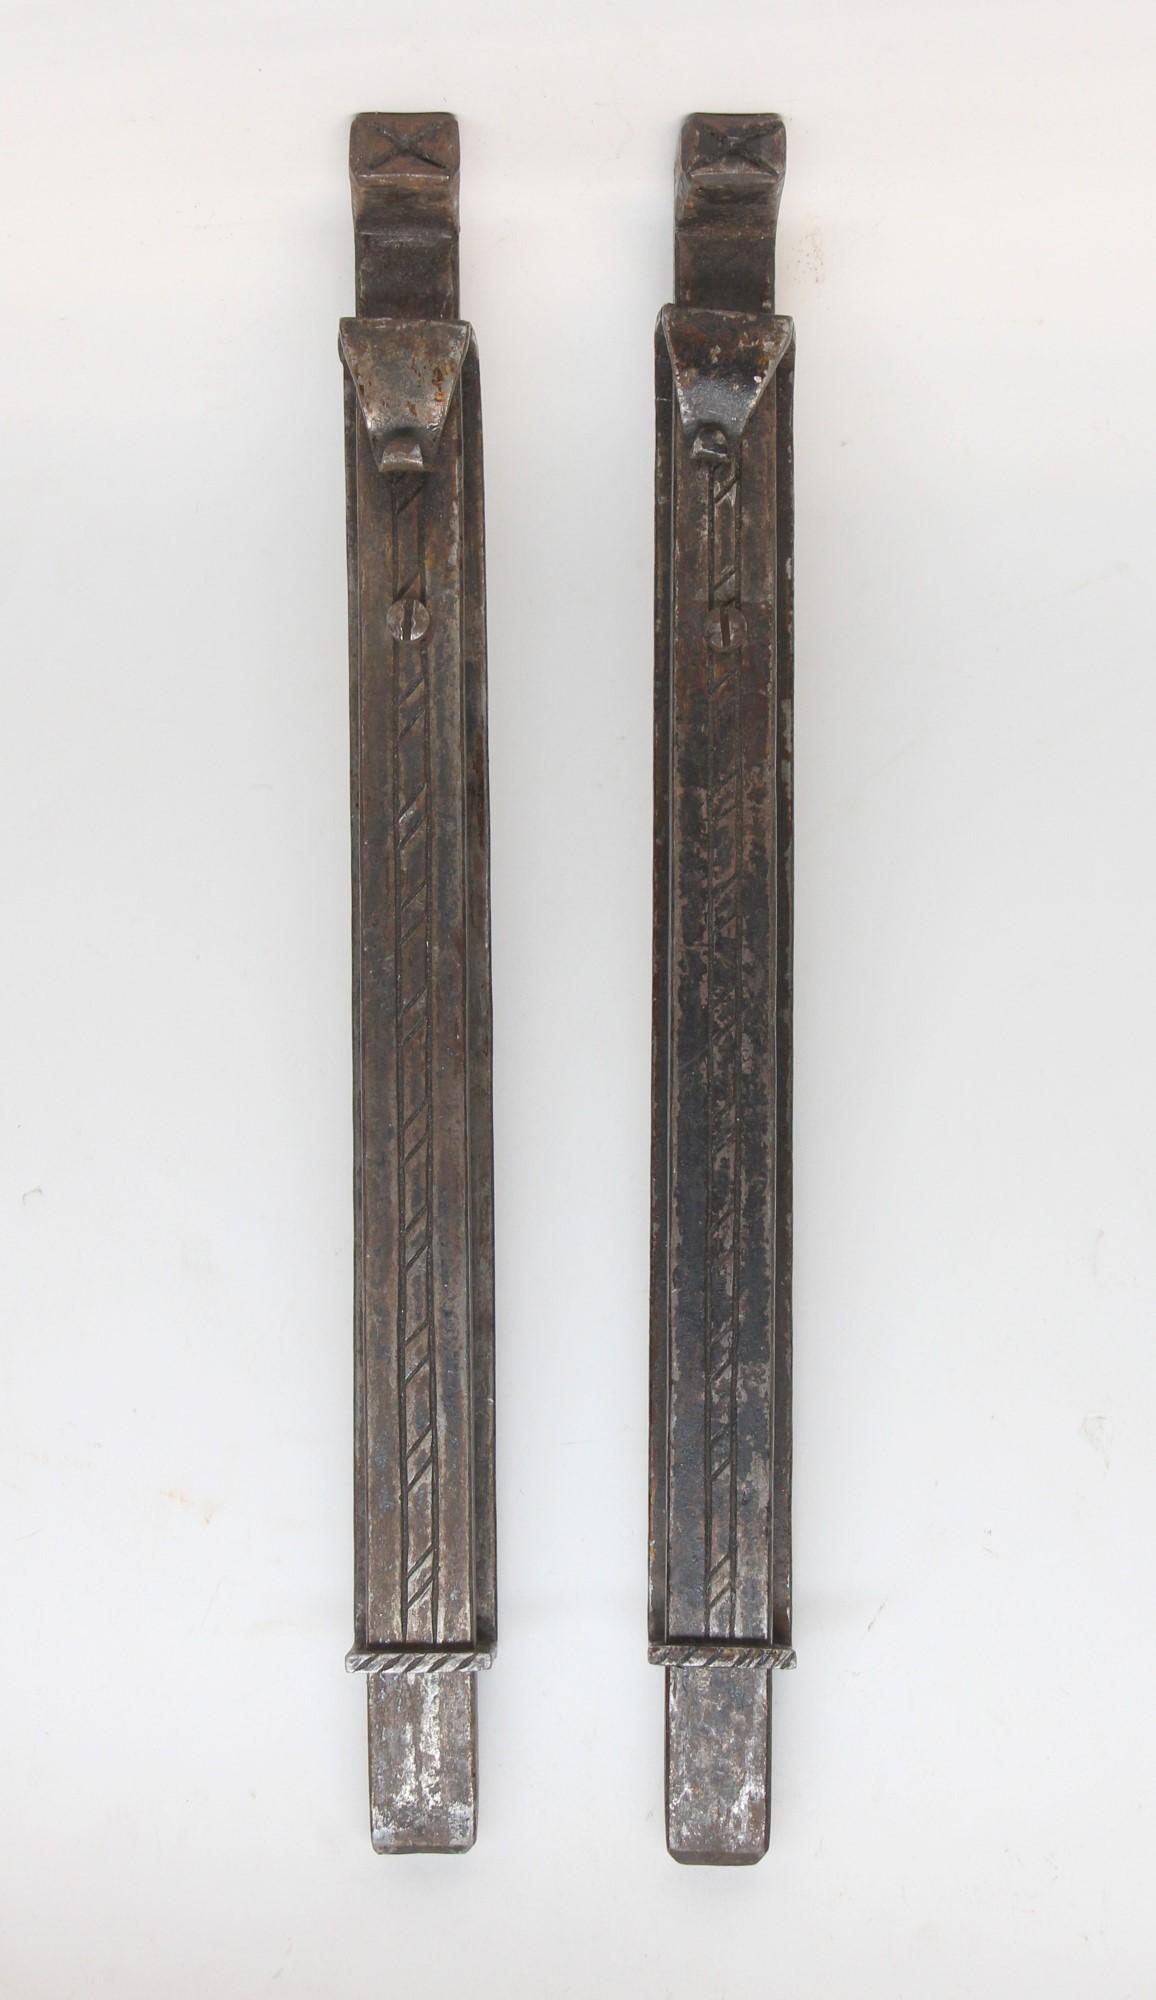 Early 20th century slide bolt for gate or door. These slide bolts are hand forged iron attributed to Samuel Yellin. They are unsigned. Priced as a pair. Please note, this item is located in our Scranton, PA location.

 